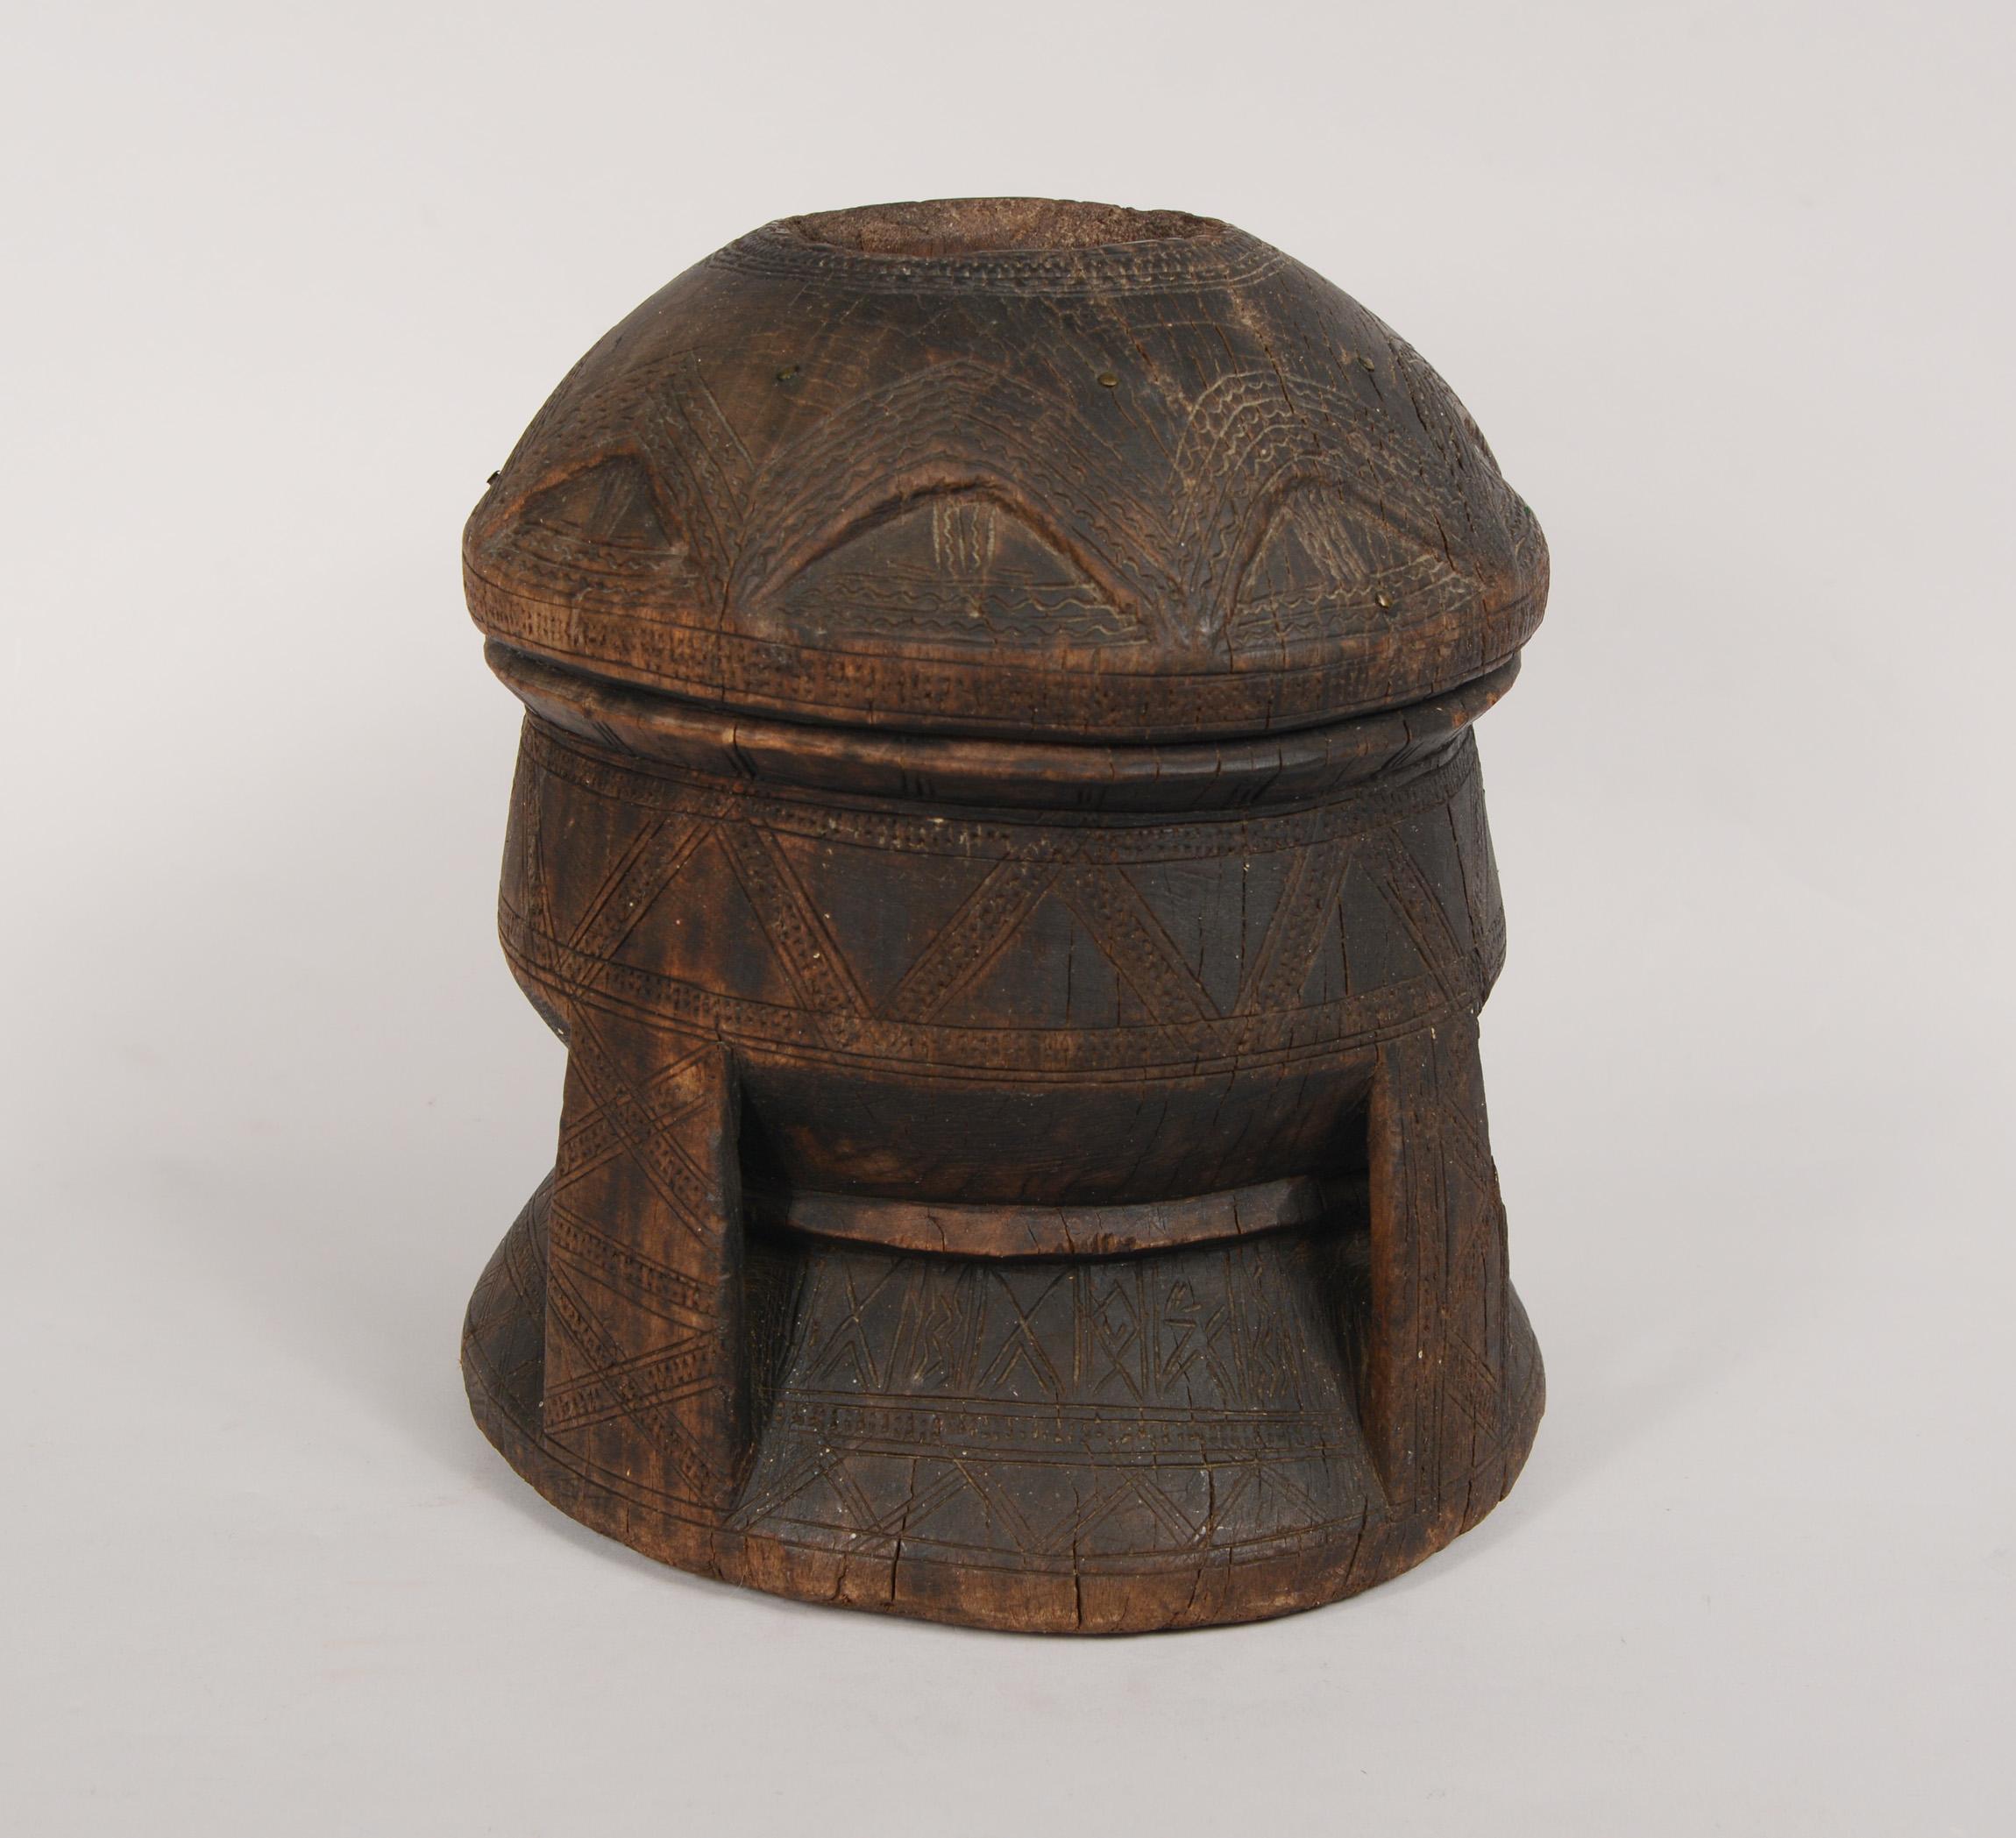 Hardwood mortar used for grinding coffee from Northern Africa. This mortar decorated with incised lines and small brass tacks. There are a couple of small losses.